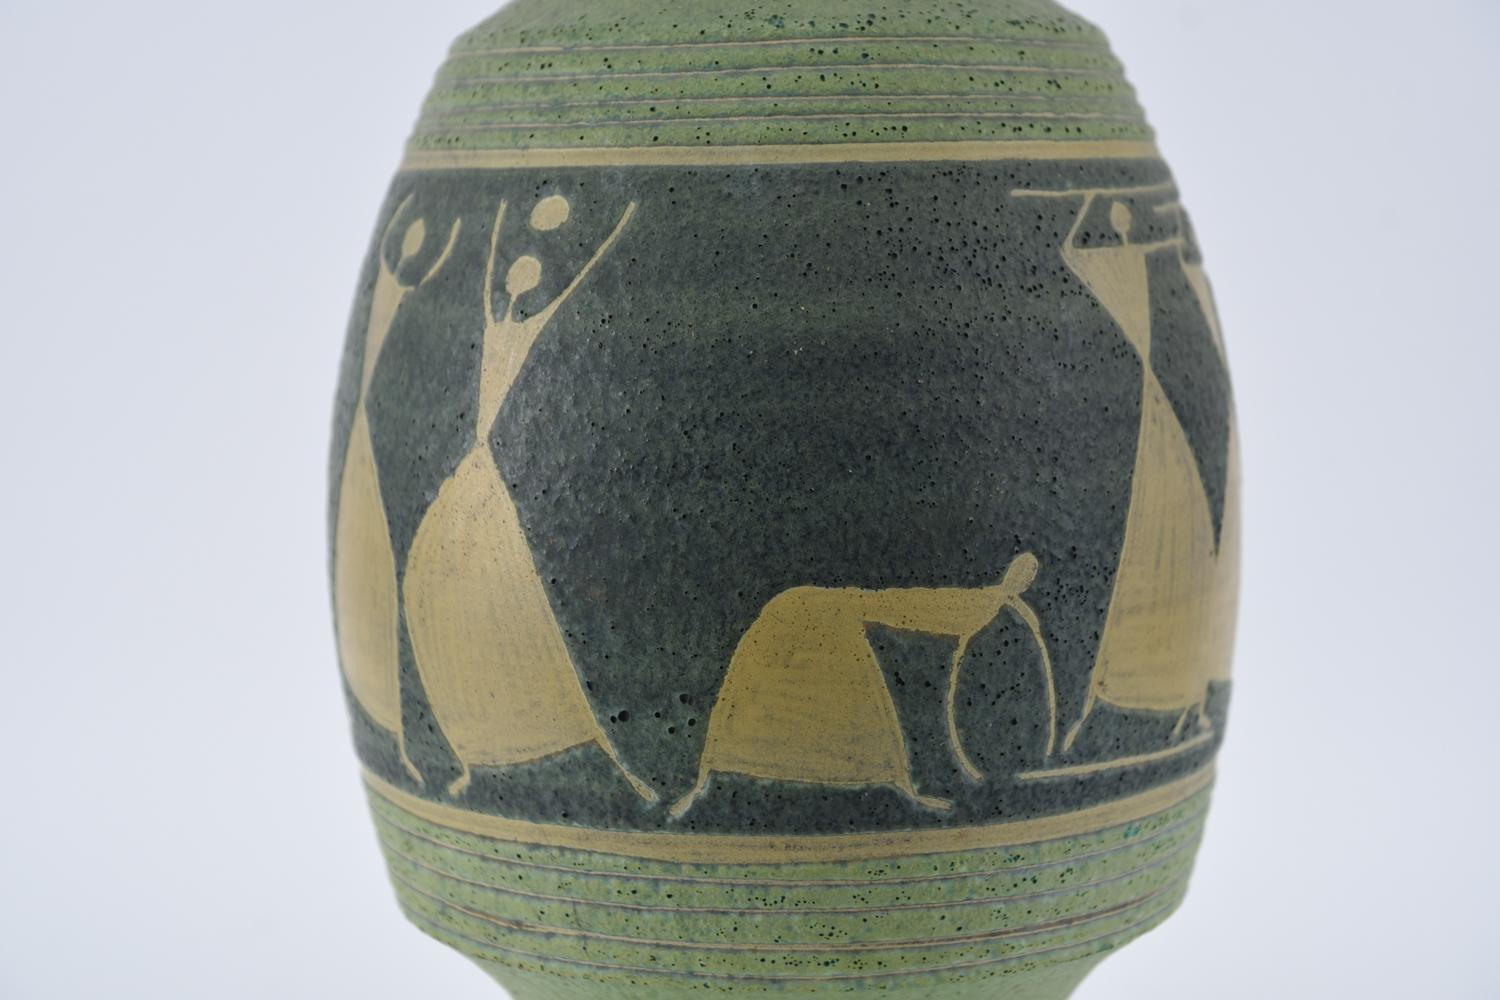 Decorated in the Primitive style, with impressed schematic figures carrying sticks, balls, and umbrellas. Combed geometric lines, thick matte glaze with pinhole texture (possibly lava glaze). Likely earthenware or a darker-colored stoneware.